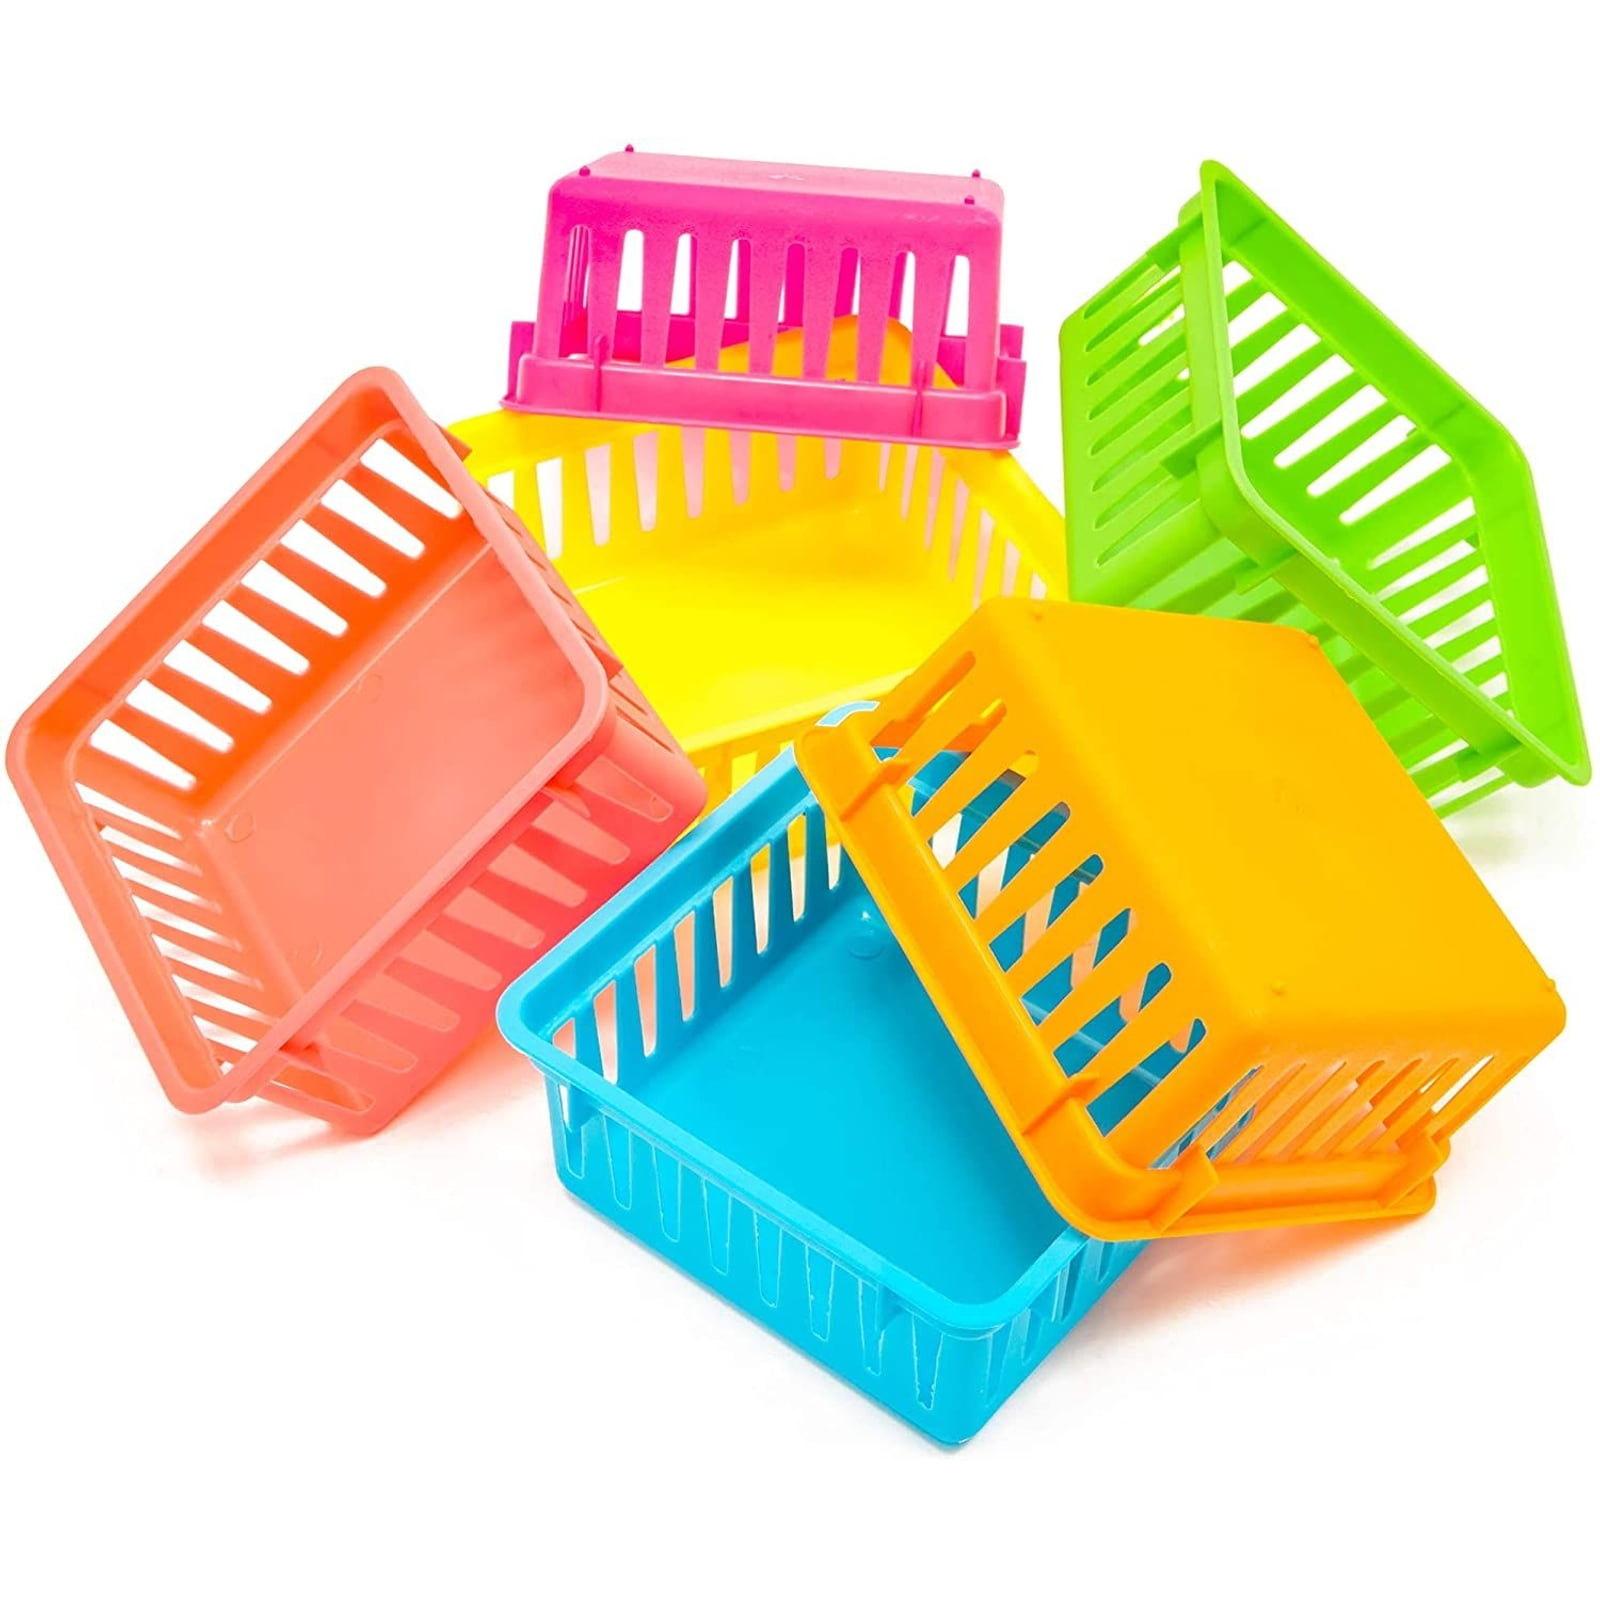 7pcs Plastic Storage Bins And Baskets For Efficient Home Classroom  Organization - Small Containers In Multiple Colors For Kitchen, Cupboard  Box, And B